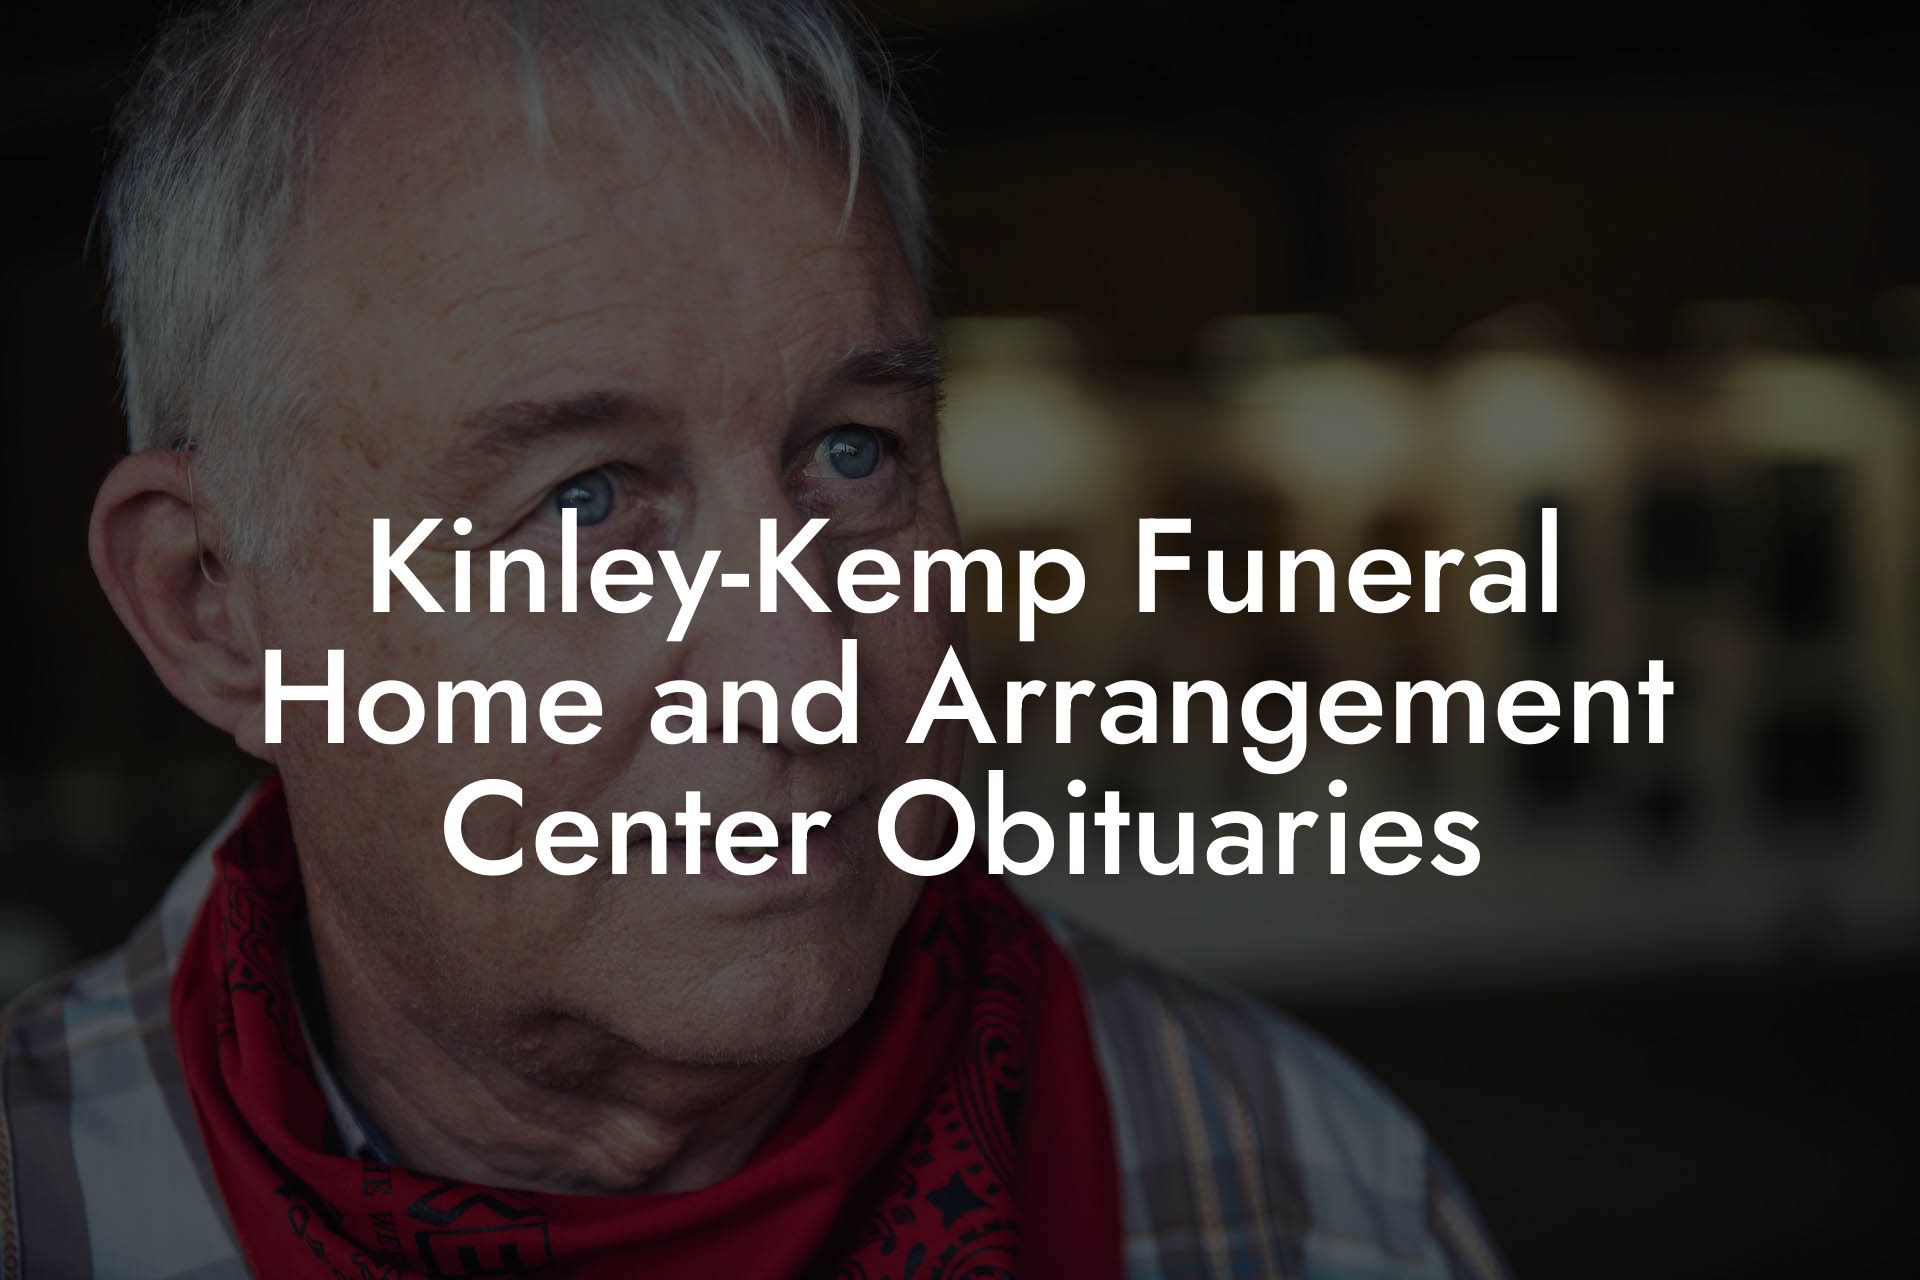 Kinley-Kemp Funeral Home and Arrangement Center Obituaries